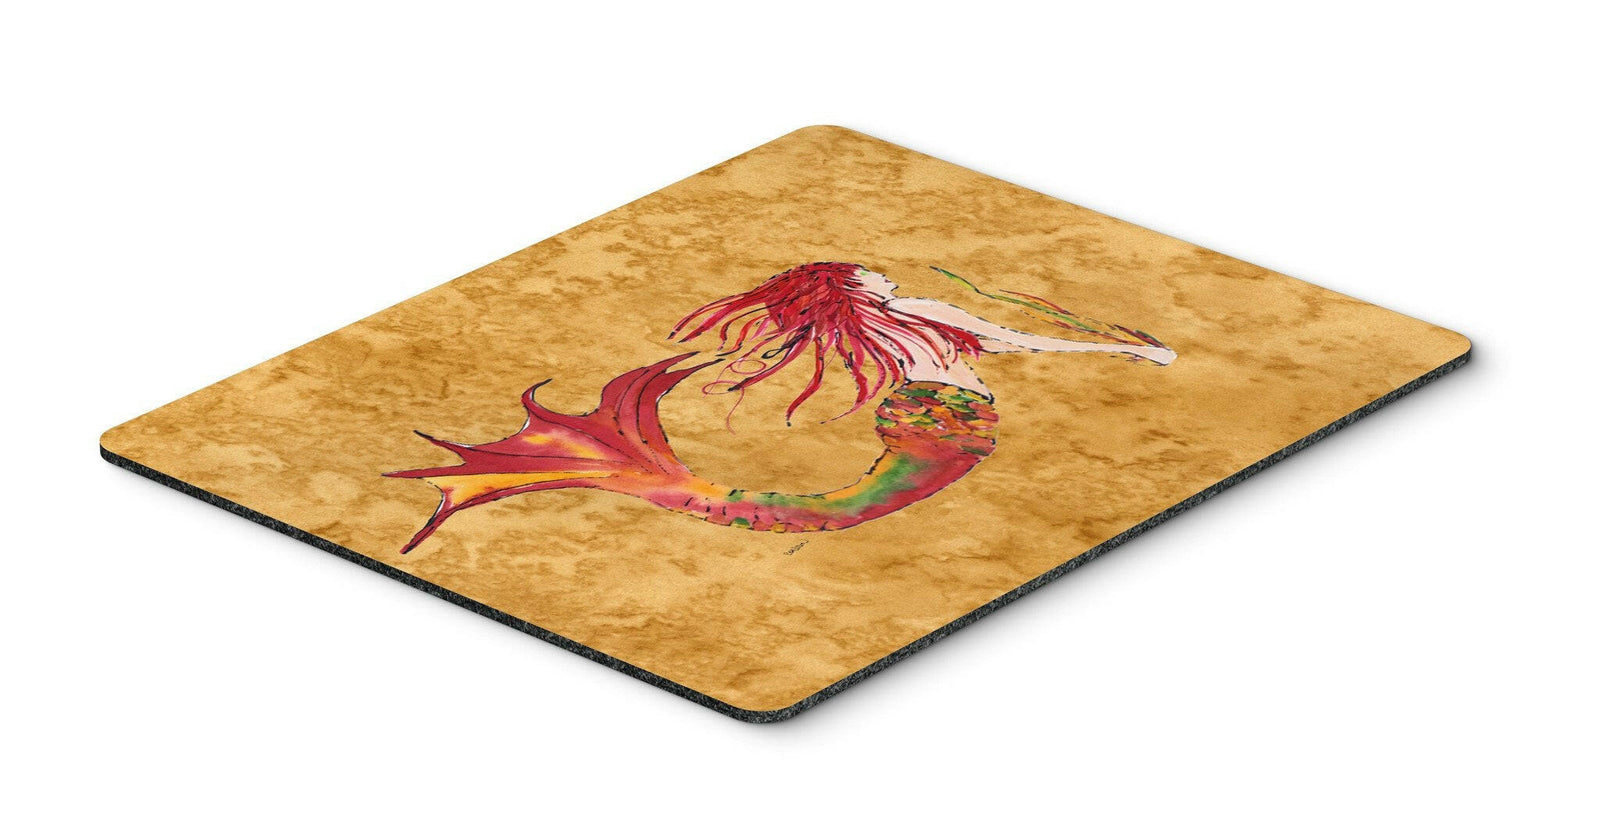 Ginger Red Headed Mermaid on Gold Mouse Pad, Hot Pad or Trivet 8727MP by Caroline's Treasures